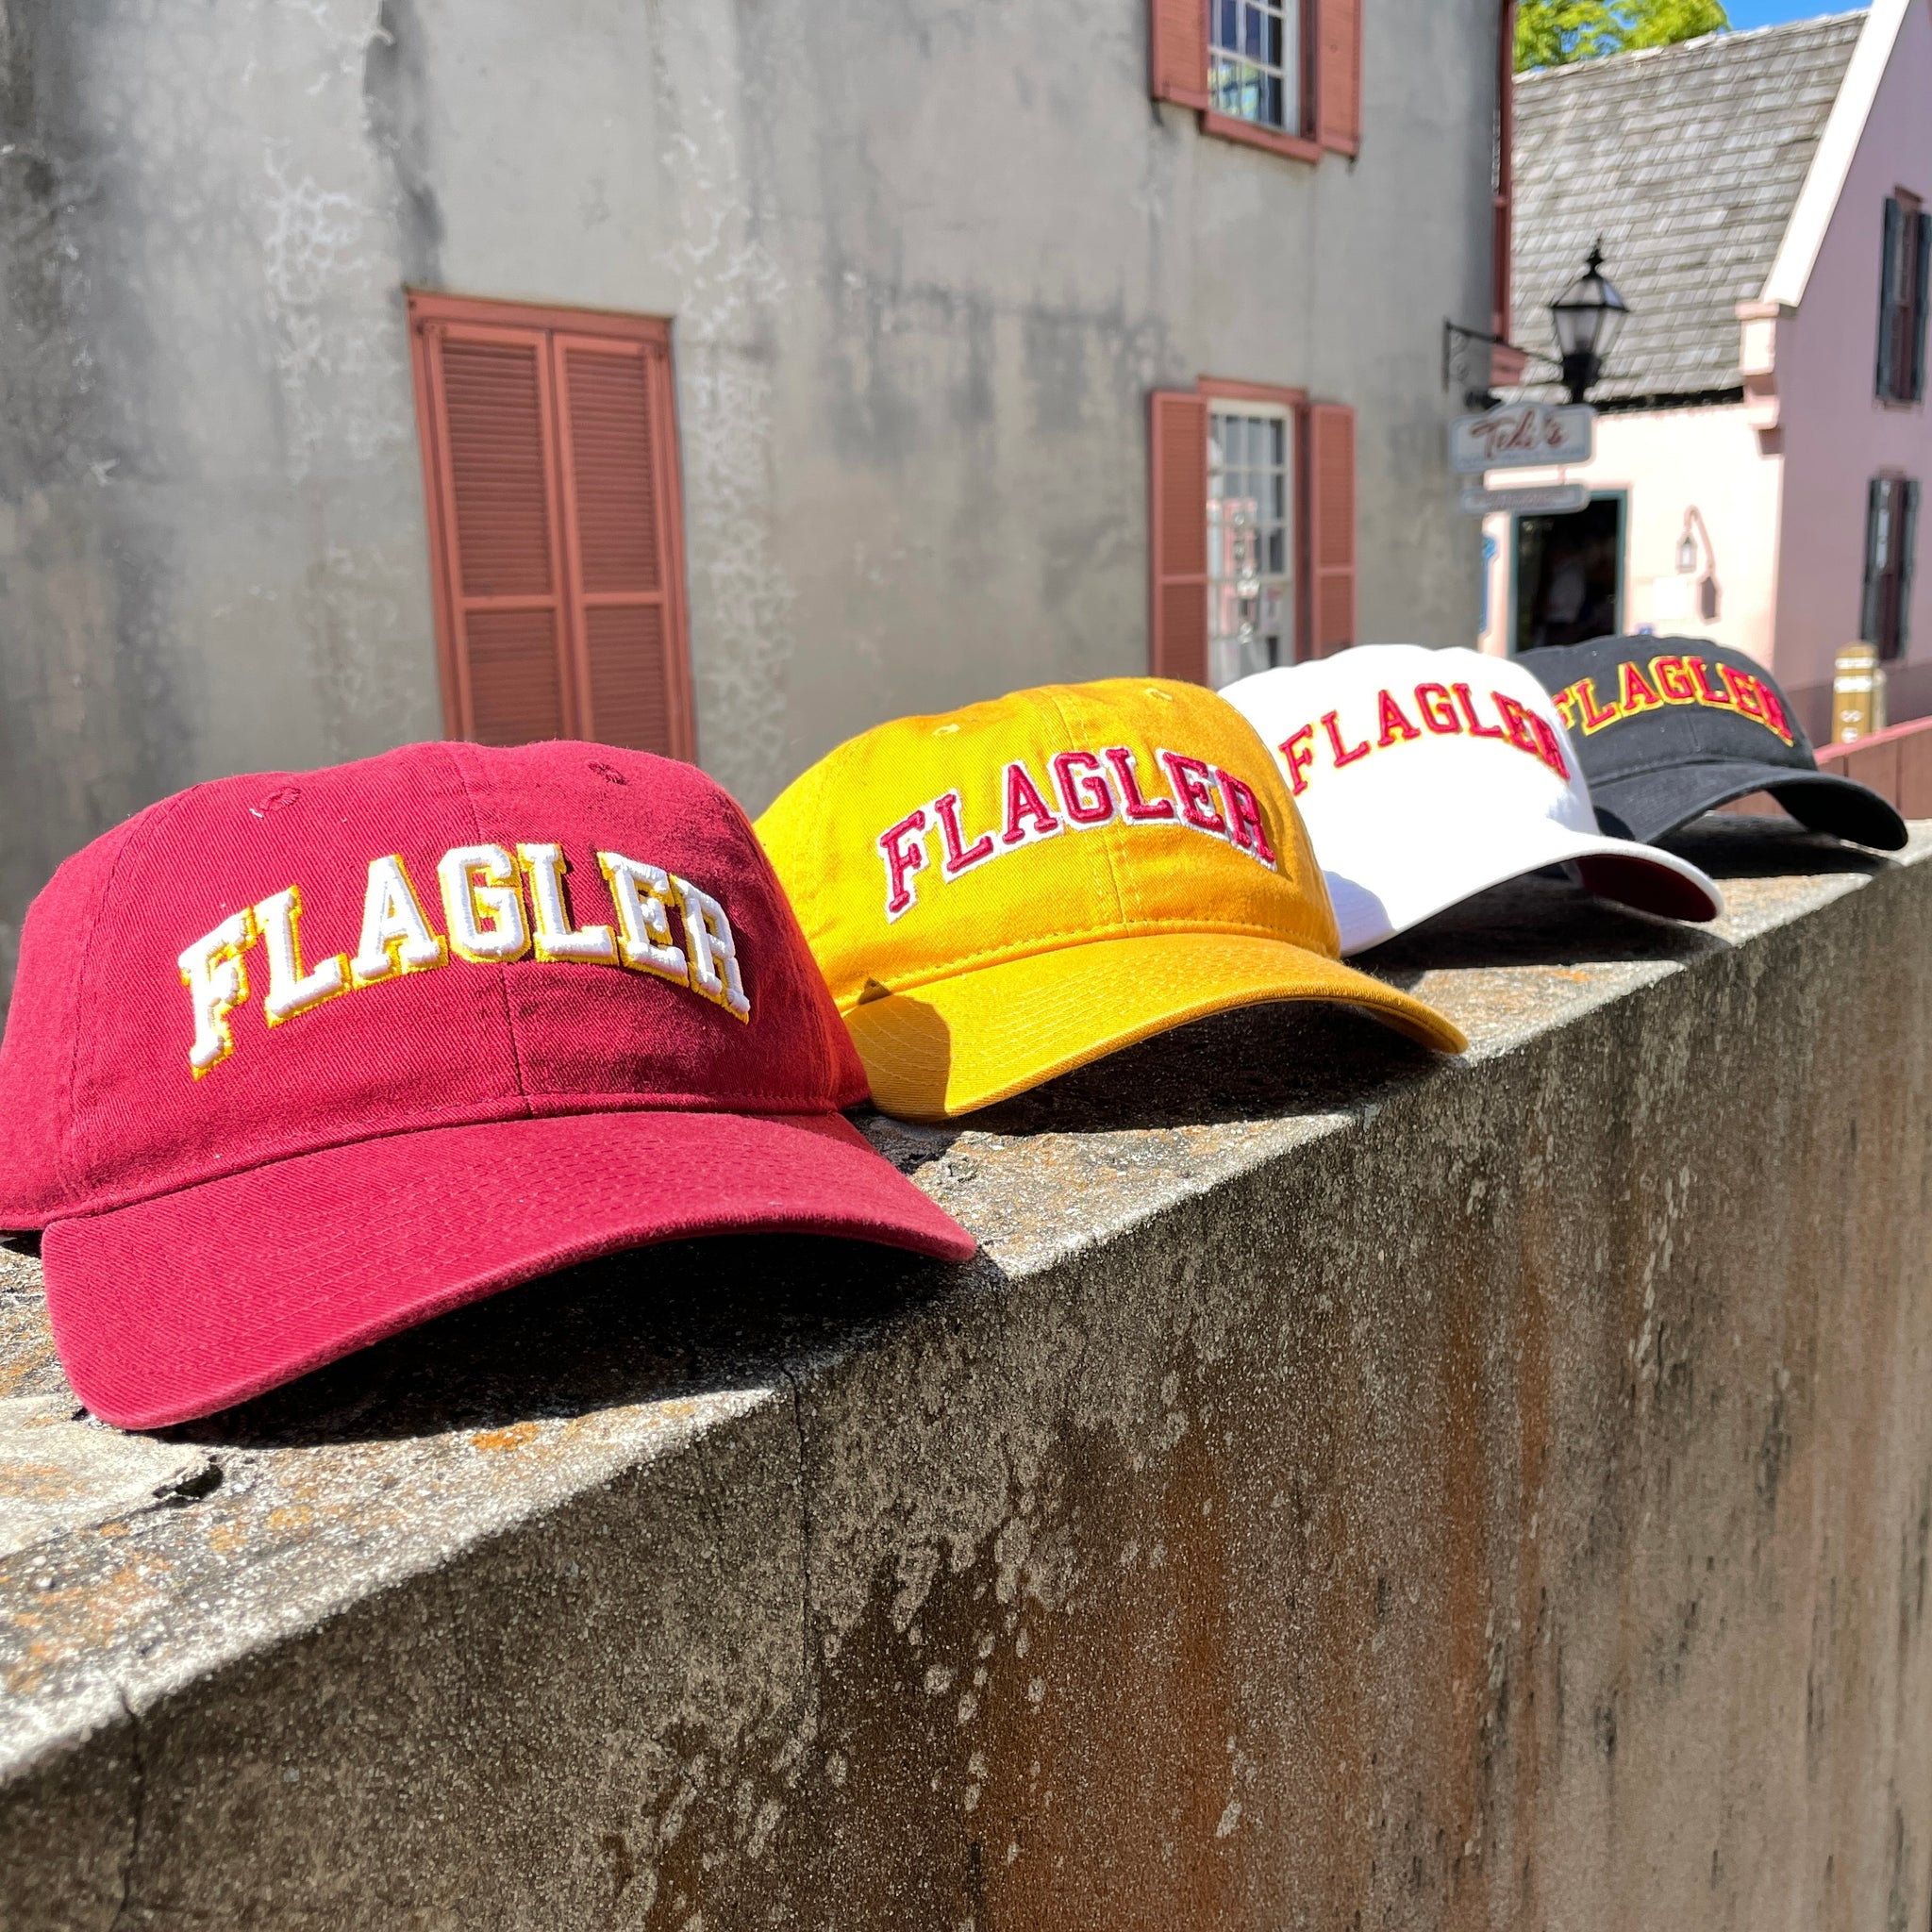 4 hats in photo. Crimson hat with white letters saying Flagler. Yellow Hat with red letters saying Flagler. White hat with red letters saying Flagler. Black hat with red letters saying Flagler